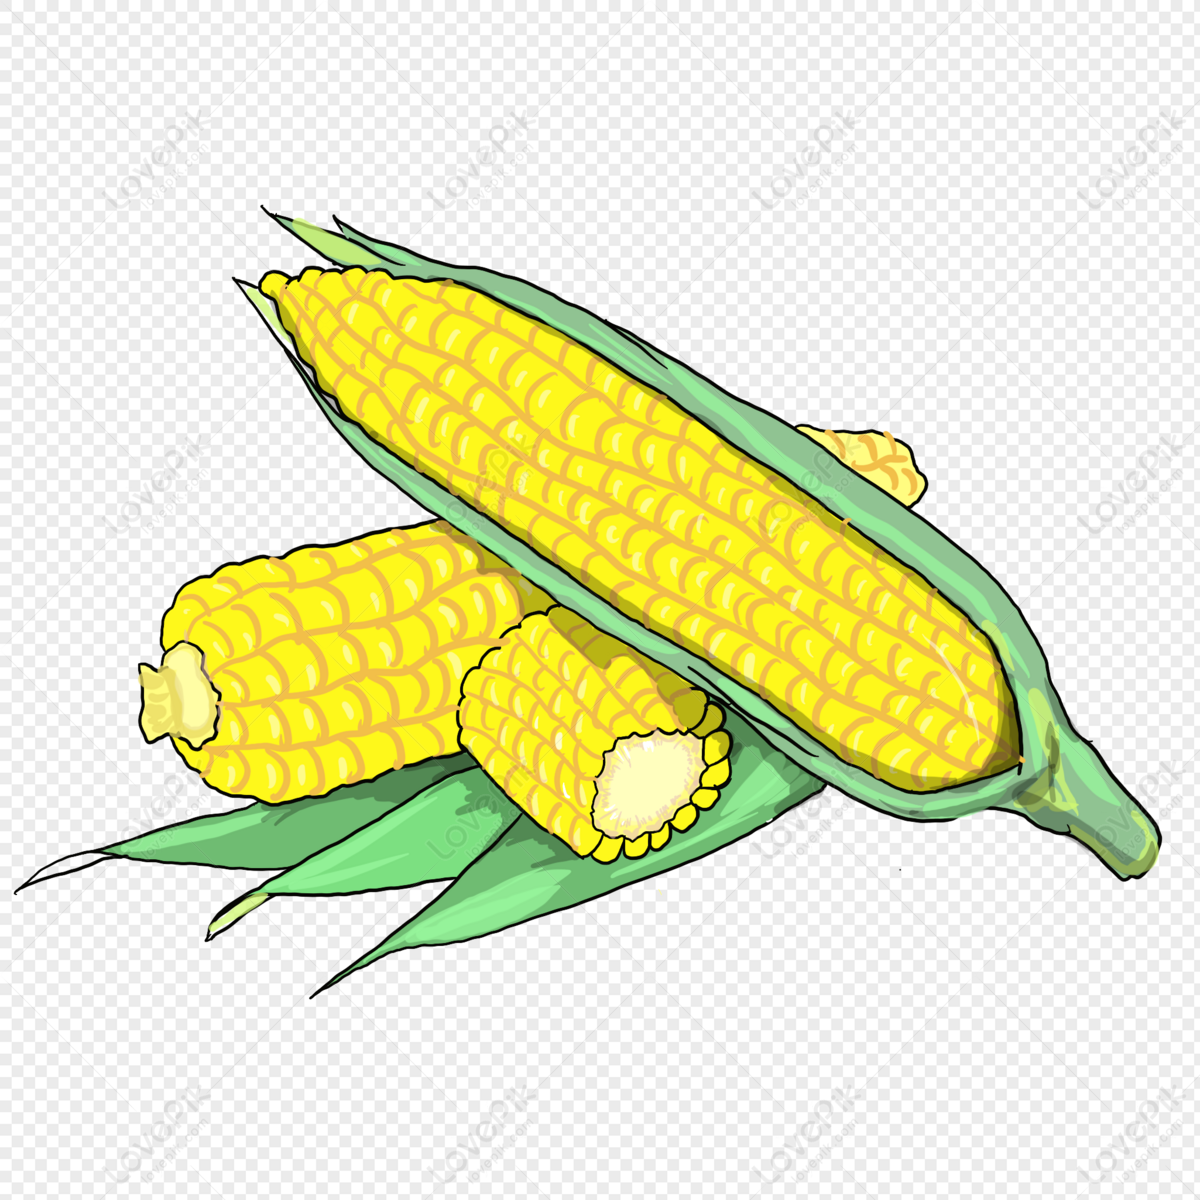 Corn PNG Picture And Clipart Image For Free Download - Lovepik | 401314025